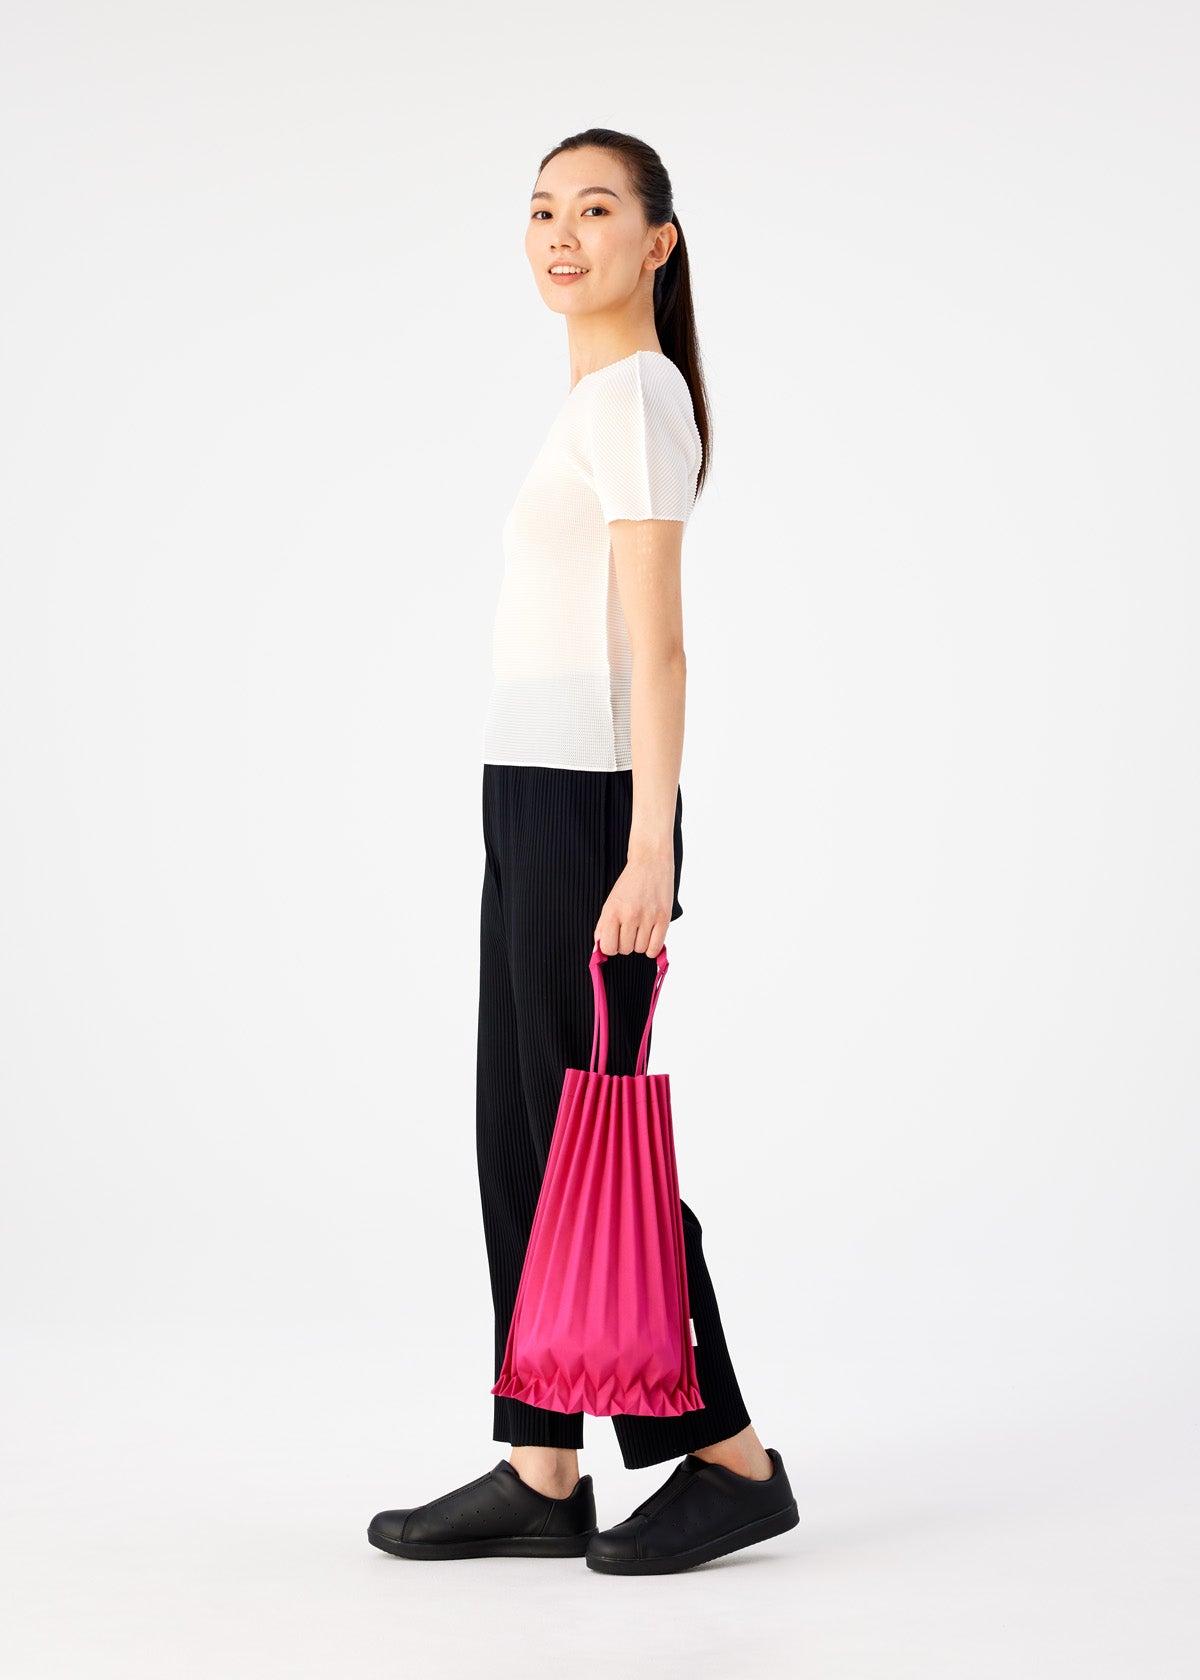 The official ISSEY MIYAKE ONLINE STORE